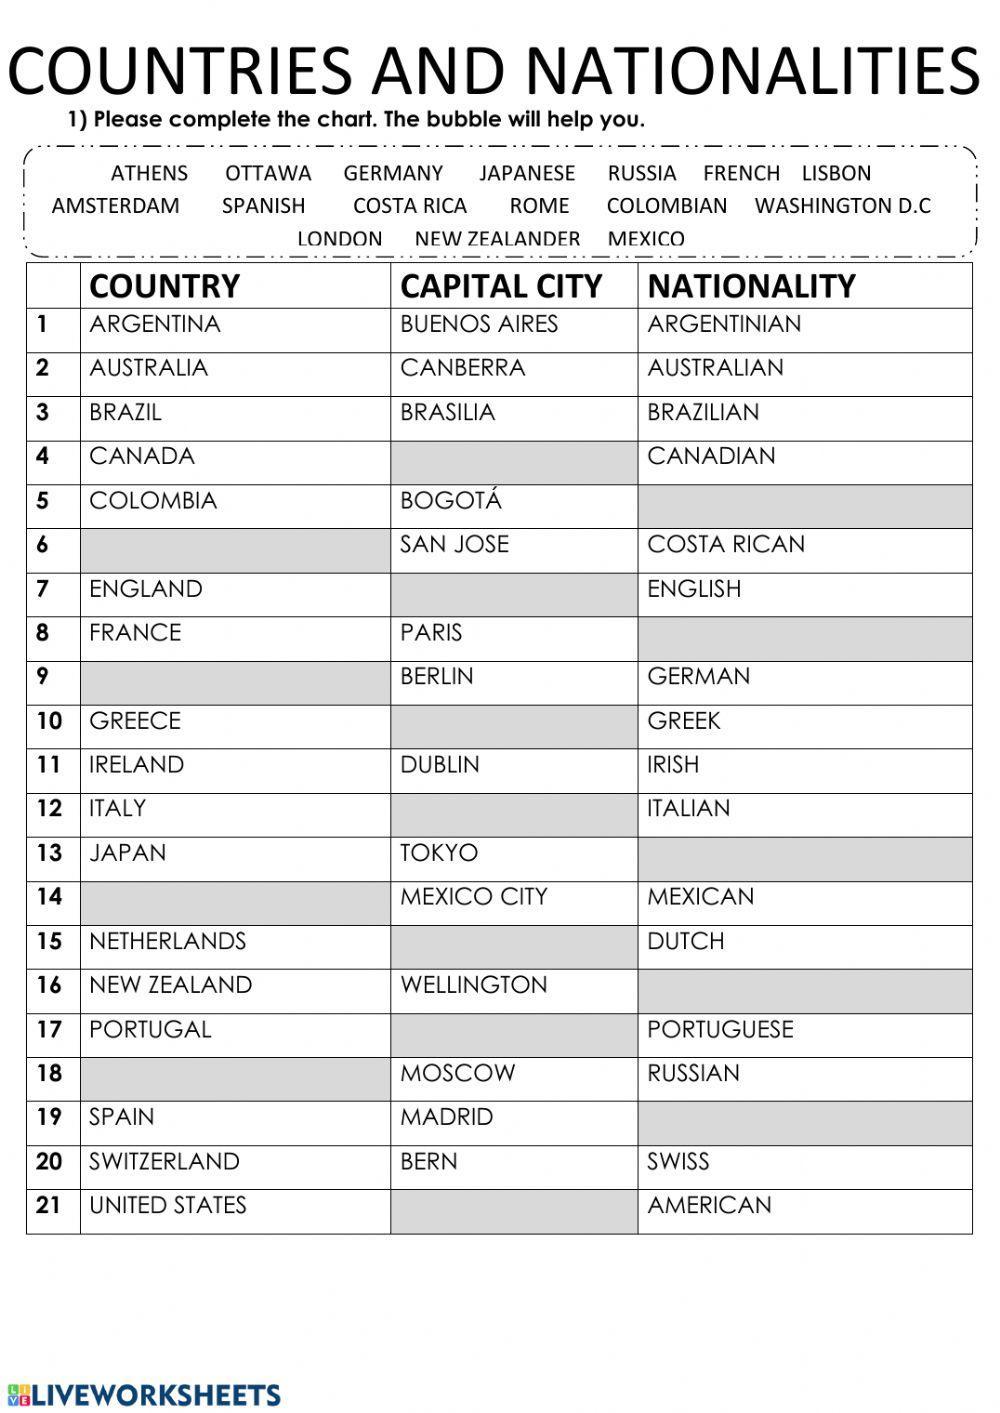 Countries, cities and nationalities